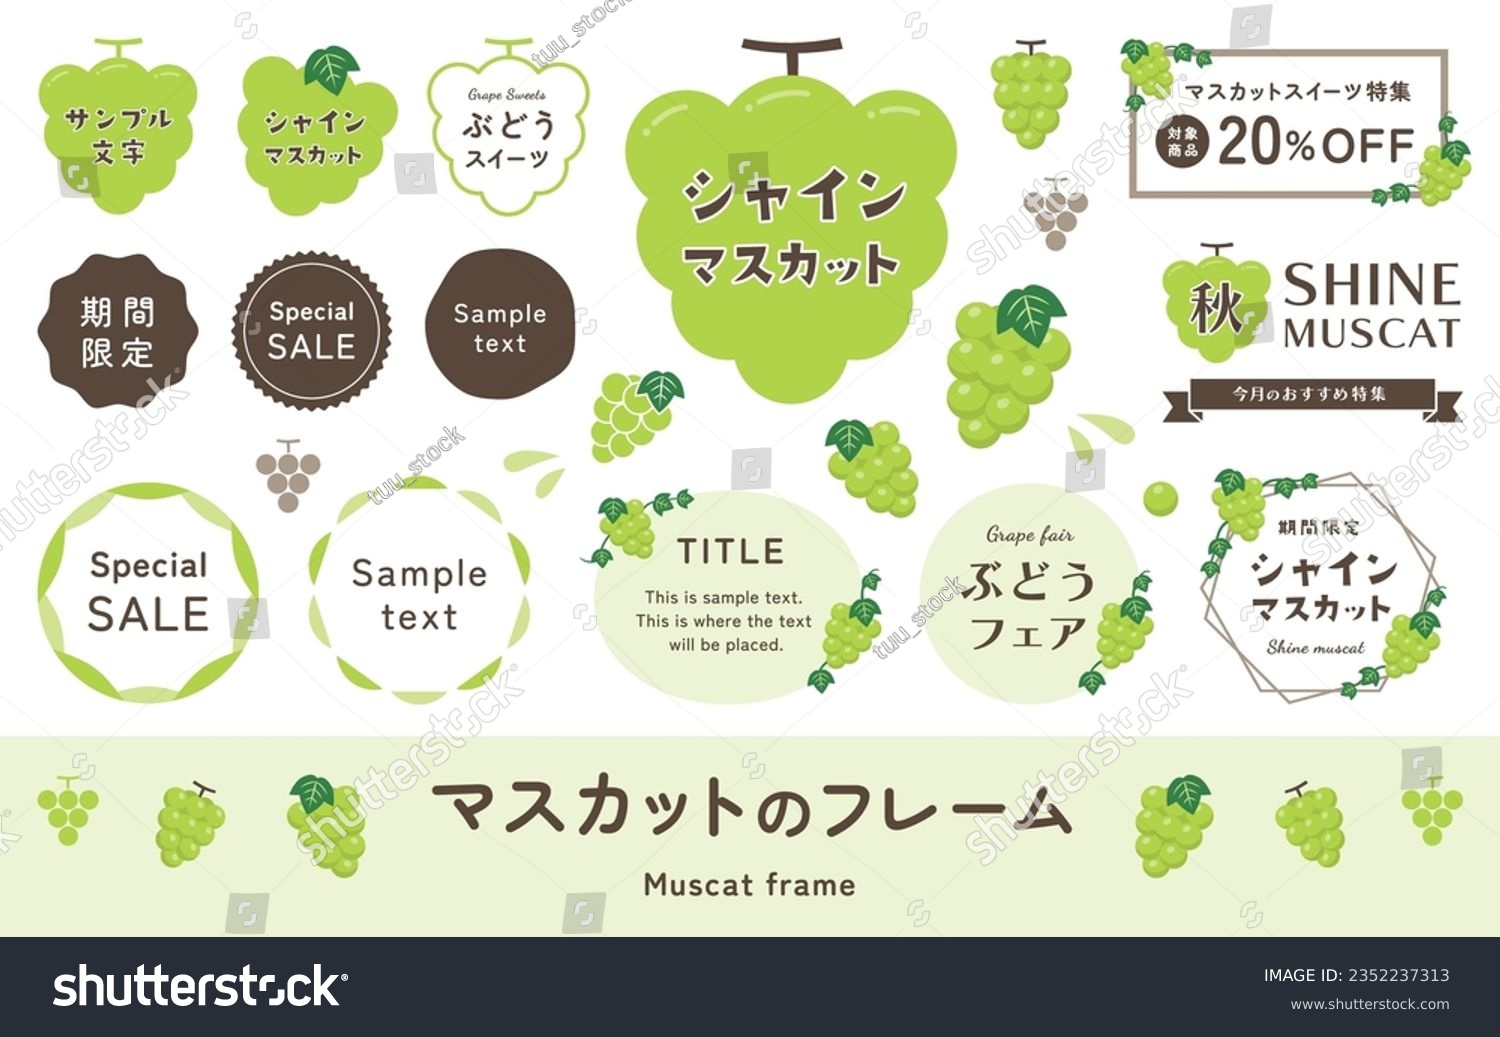 Illustration and frame set of white grapes and muscats. Title headings, label material, simple and cute vector decorations.(Translation of Japanese text: "Muscat frame, Sample text, Muscat fair".) #2352237313